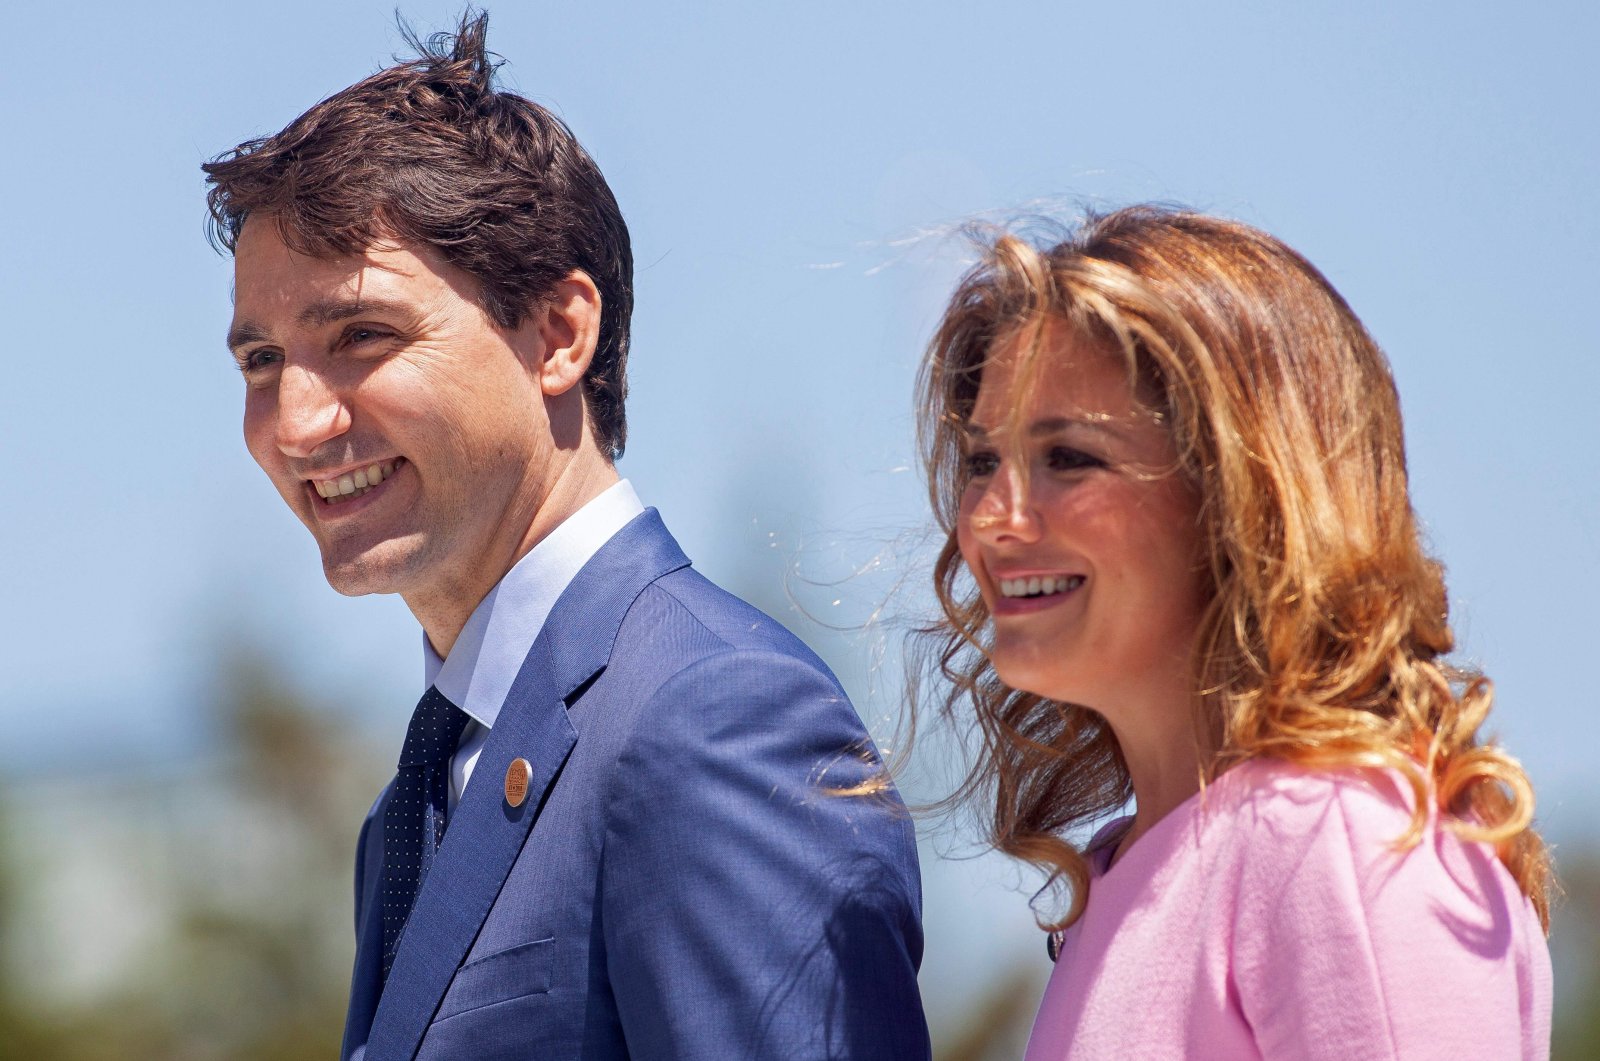 Prime Minister of Canada Justin Trudeau and his wife Sophie Gregoire Trudeau arrive for a welcome ceremony for G-7 leaders on the first day of the summit, La Malbaie, Quebec, June 8, 2018. (AFP Photo)